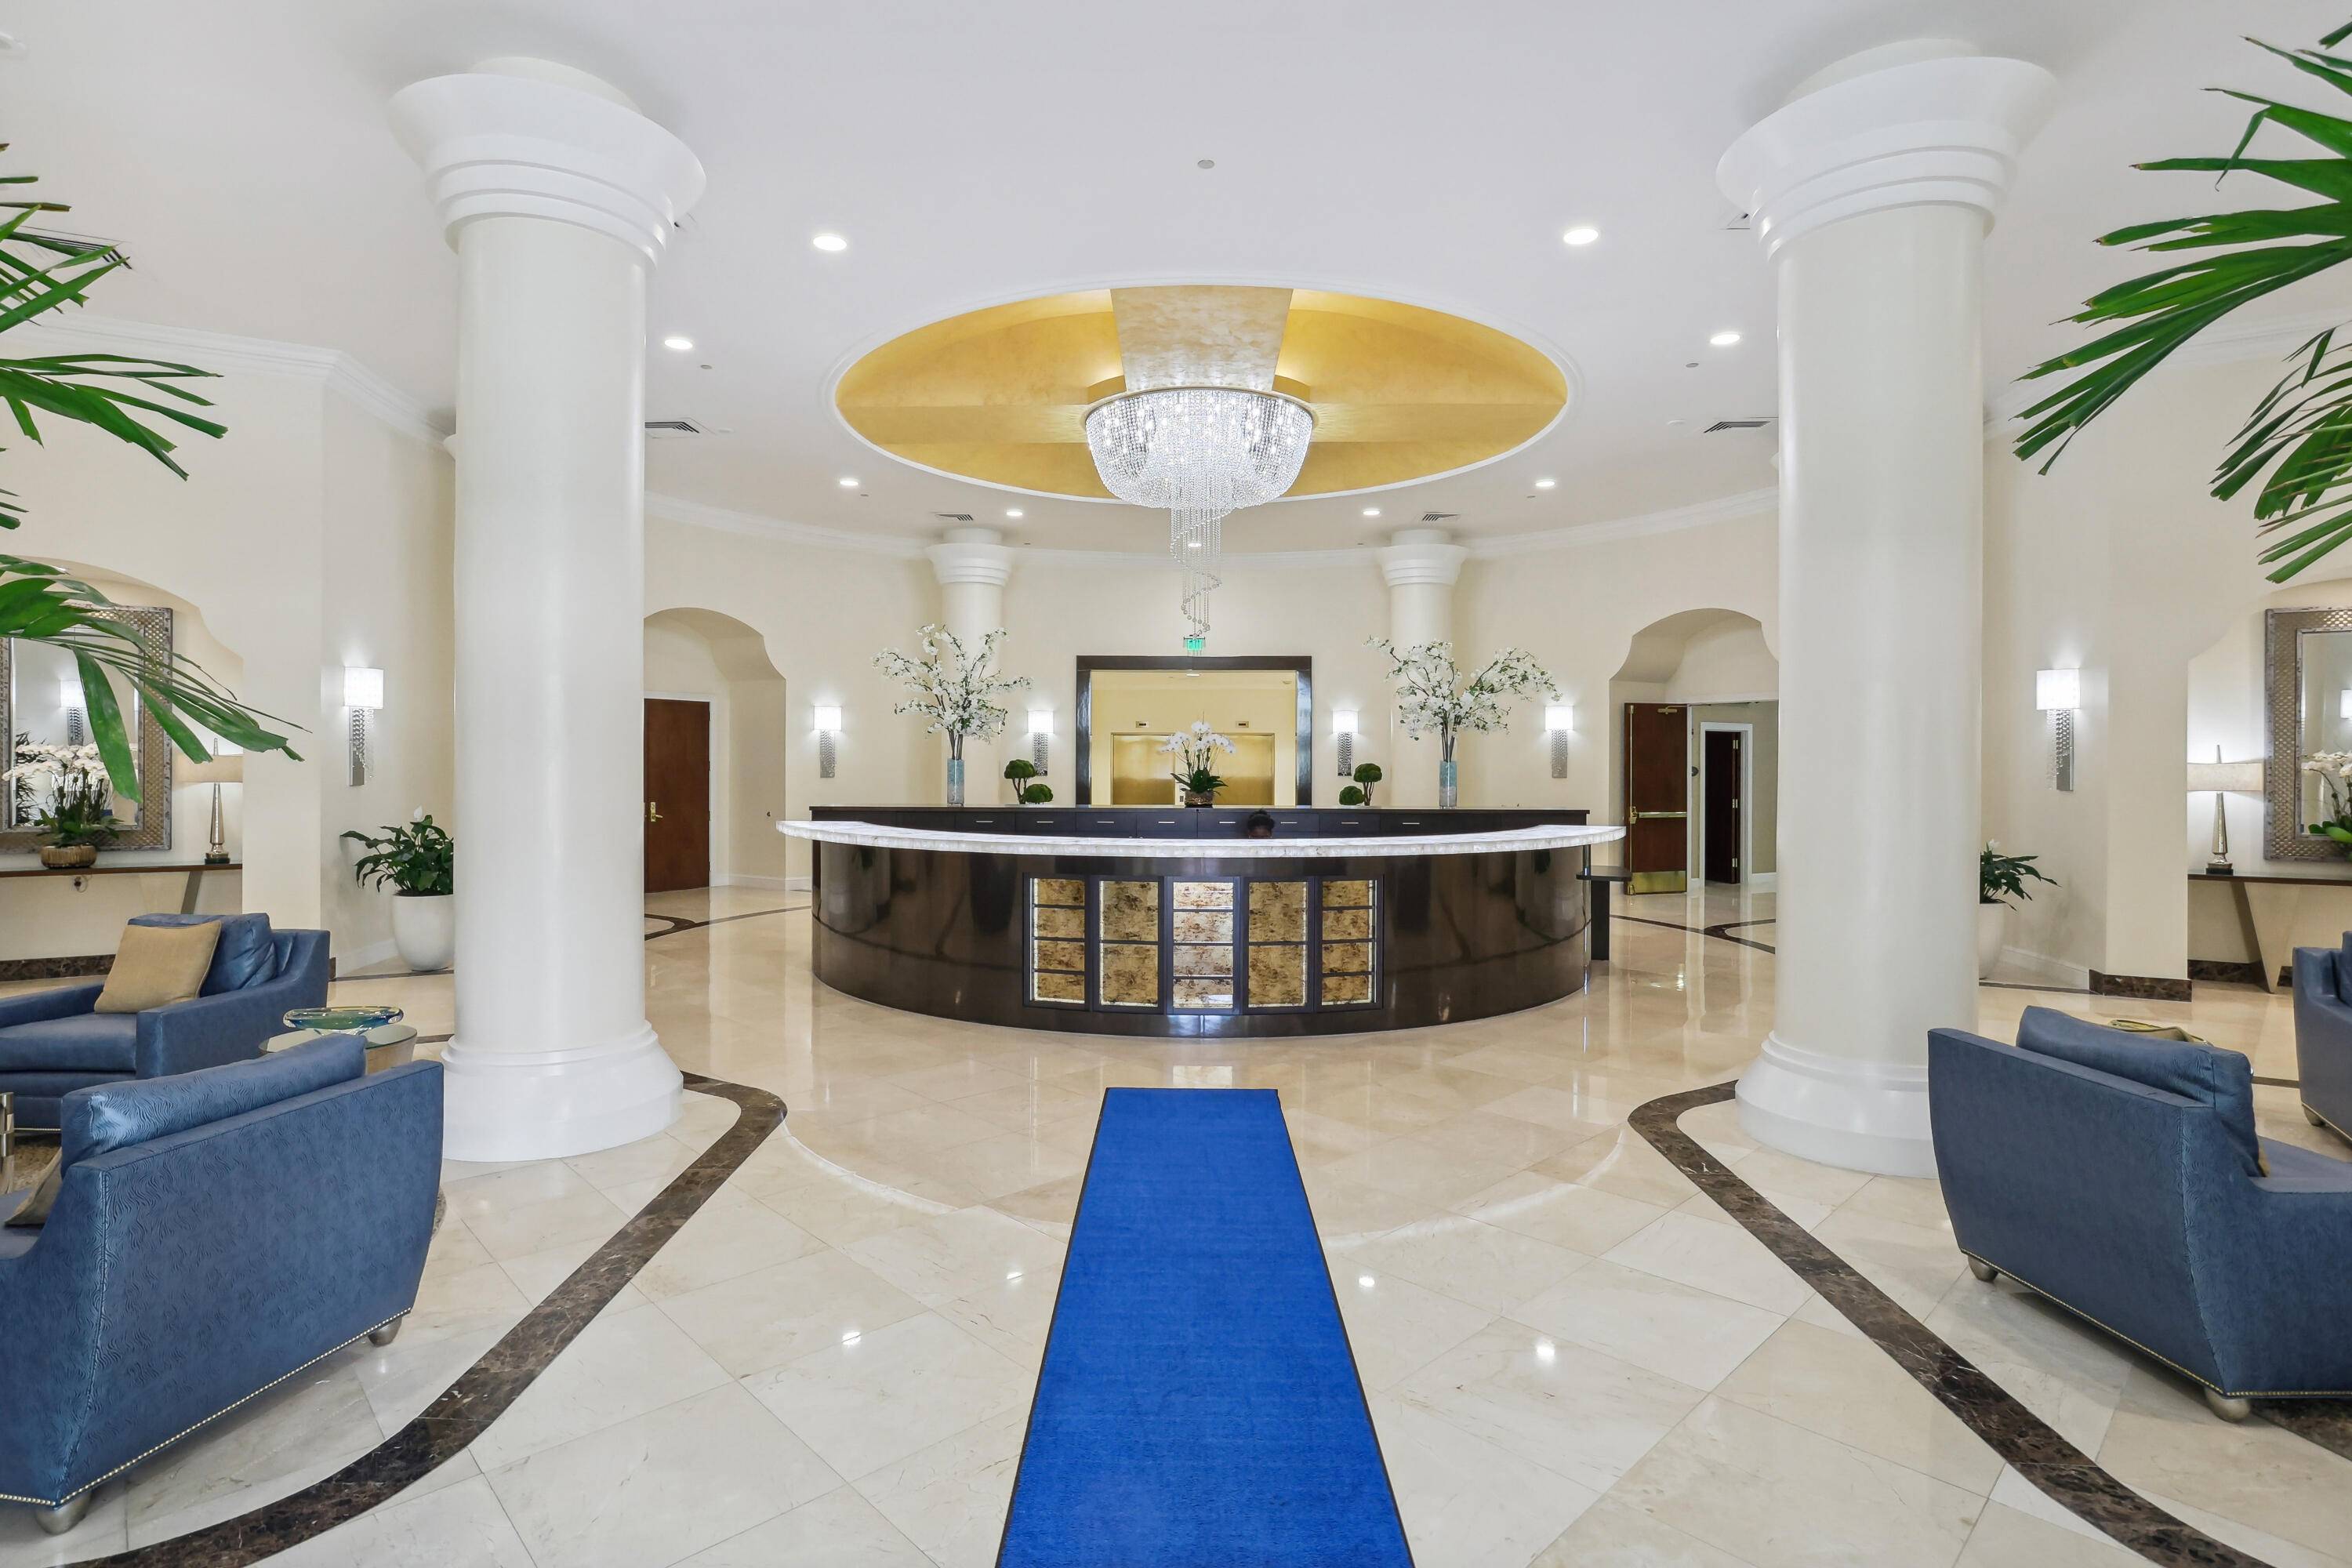 Prepare to be astonished as you pass through the Exquisite Lobby of the Prestigious Towers of Toscana, and not to forget the impressive Beach house on the sand that you ...